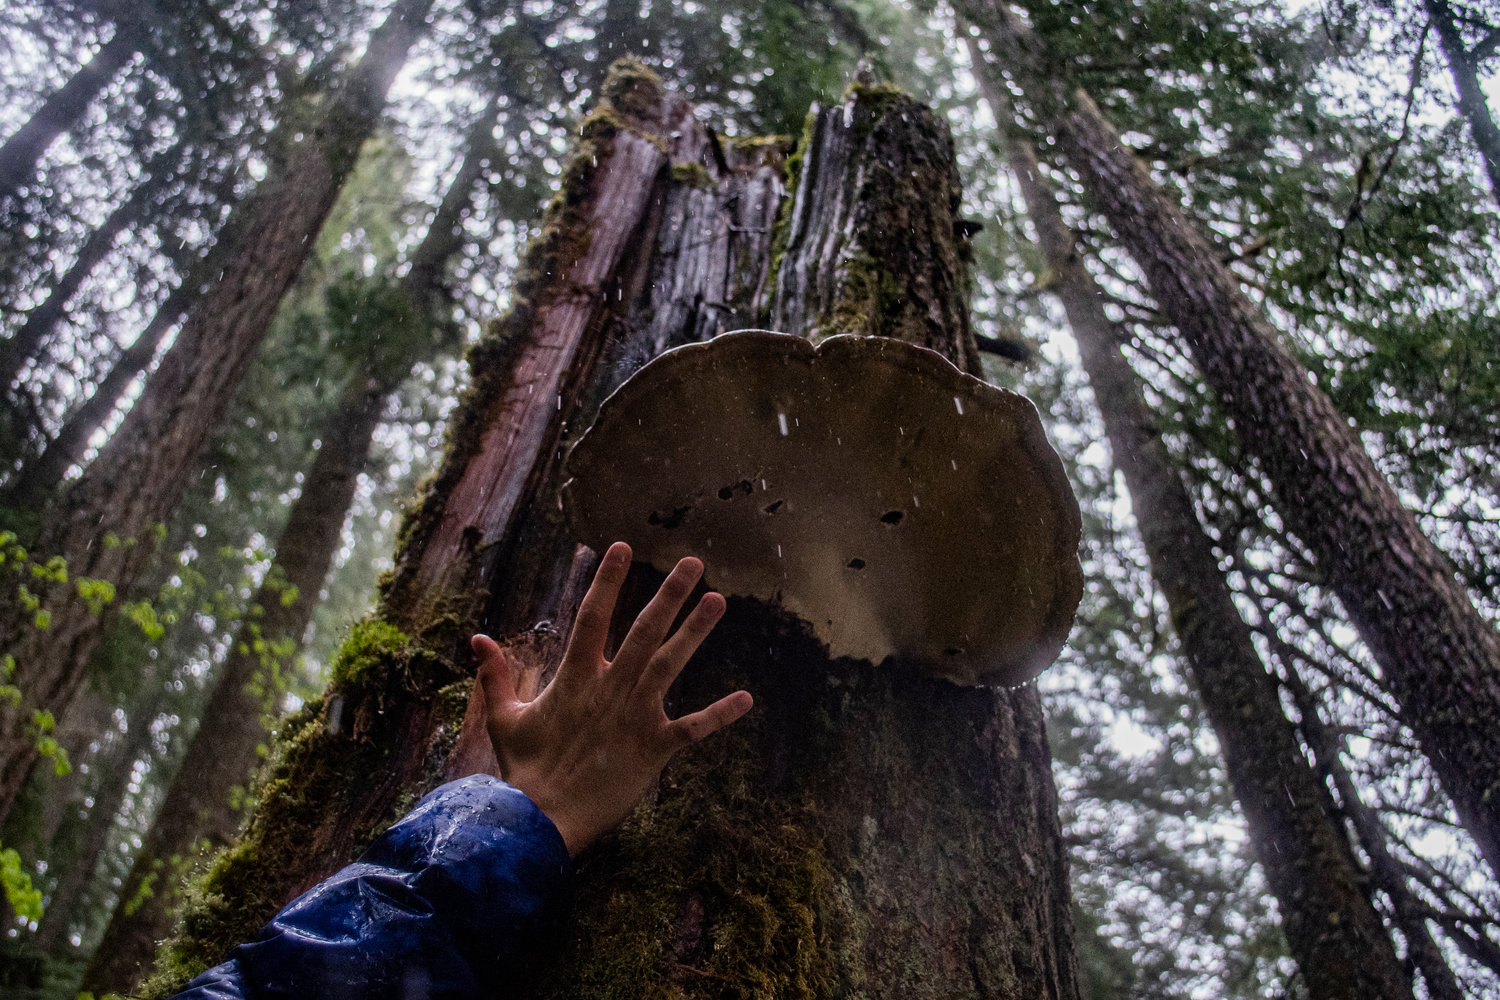 A large fungus grows on a stump beside the Ohanapecosh River in Mount Rainier National Park on Sunday afternoon as a hand is held next to it for size comparison.